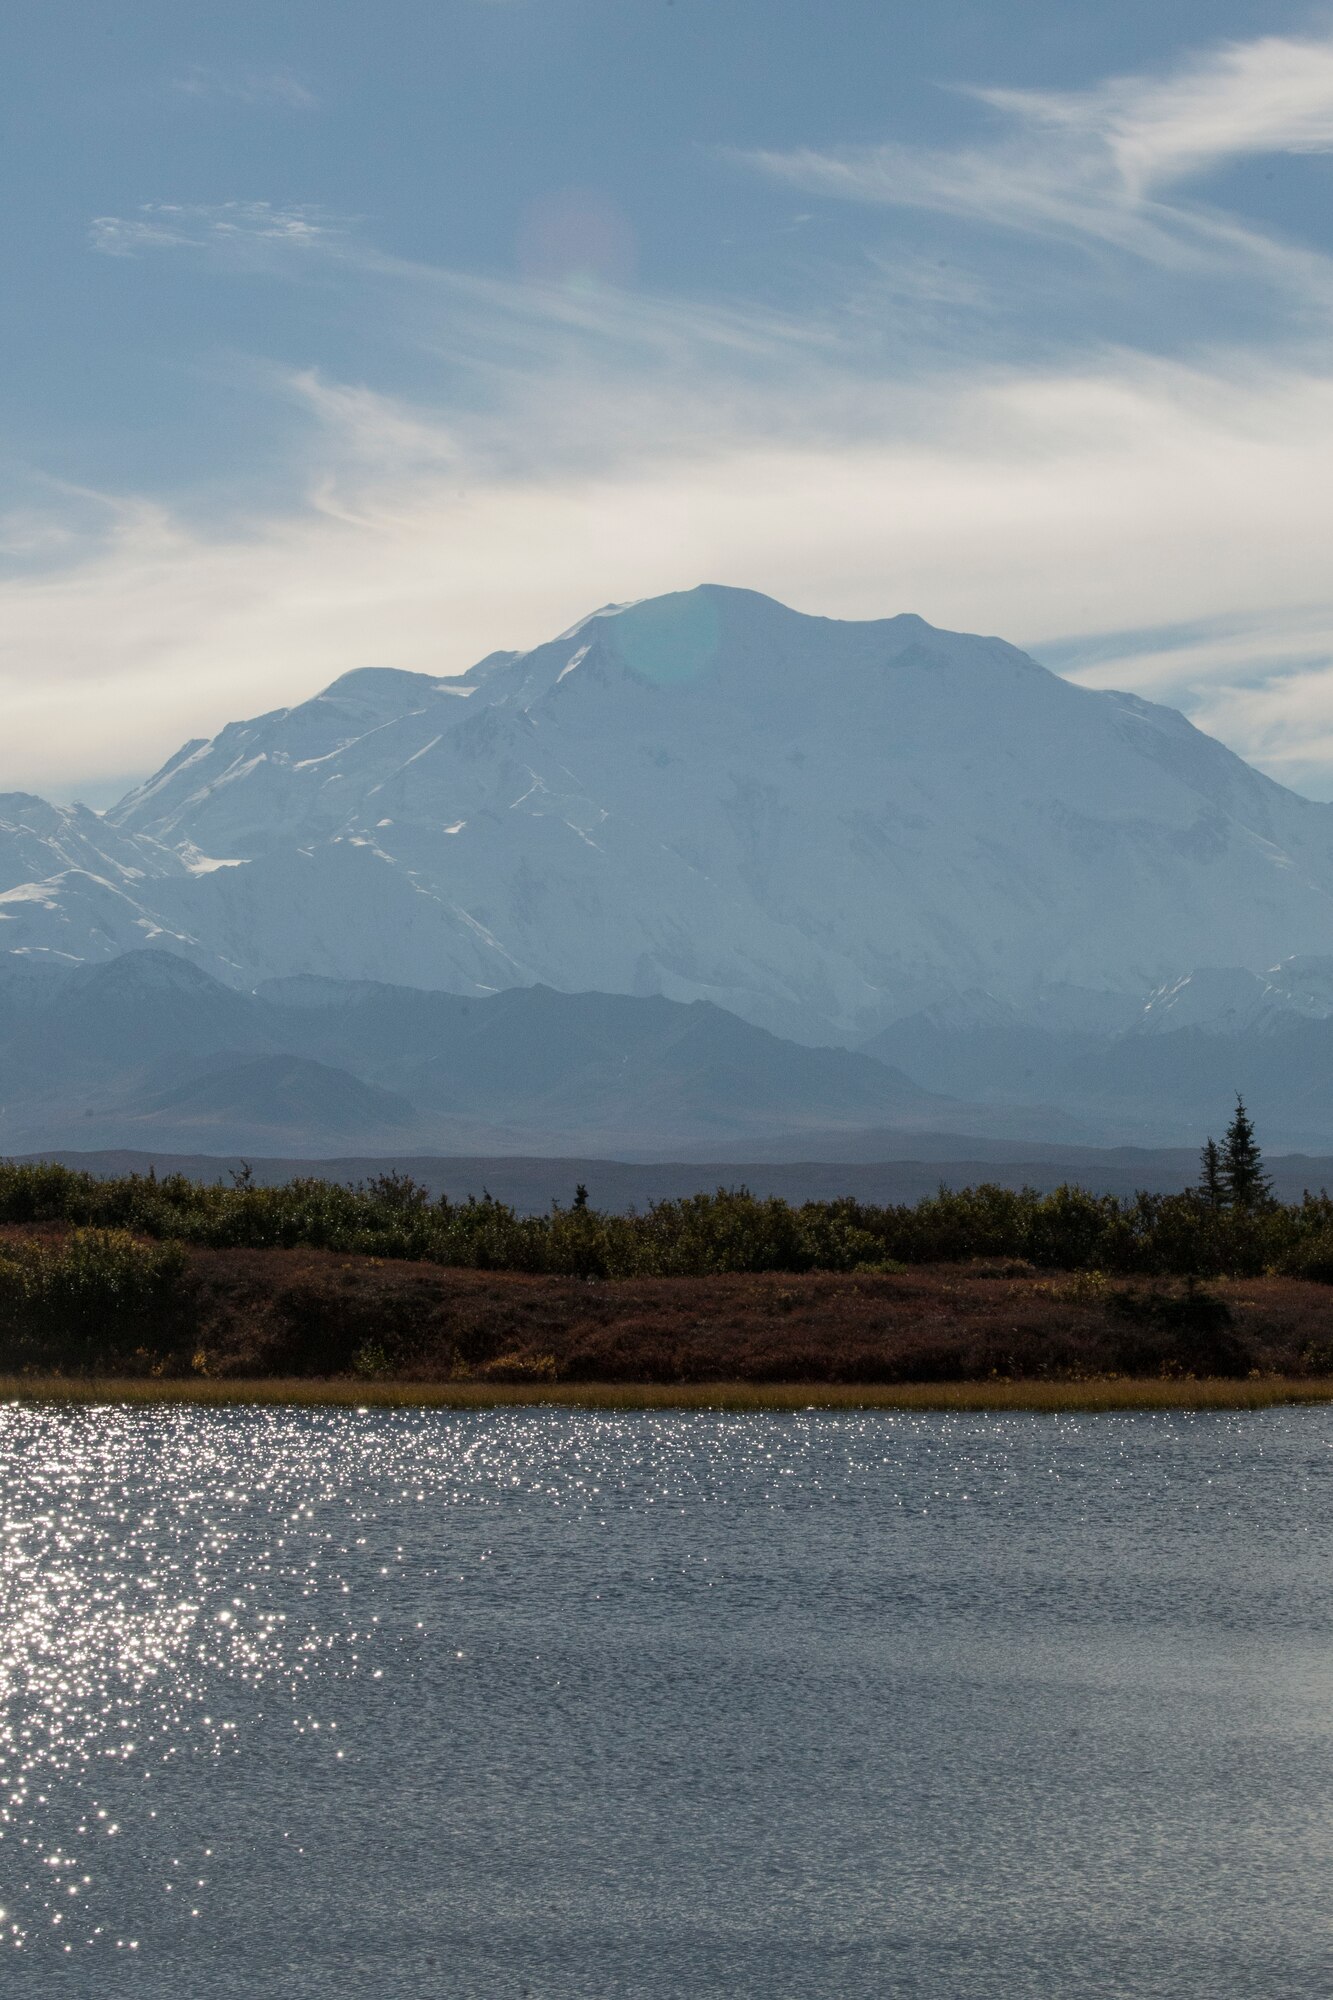 Denali is visible to visitors at Reflection Pond during Military Appreciation Day at Mile 85.3 in Denali National Park and Preserve, Alaska, Sept. 15, 2018. The 11th annual Military Appreciation Day included 400 “road lottery” tickets given out to Alaska-based service members. With the warm, dry weather conditions this year, road lottery recipients were given the chance to drive out to the end of the park road at Mile 92.